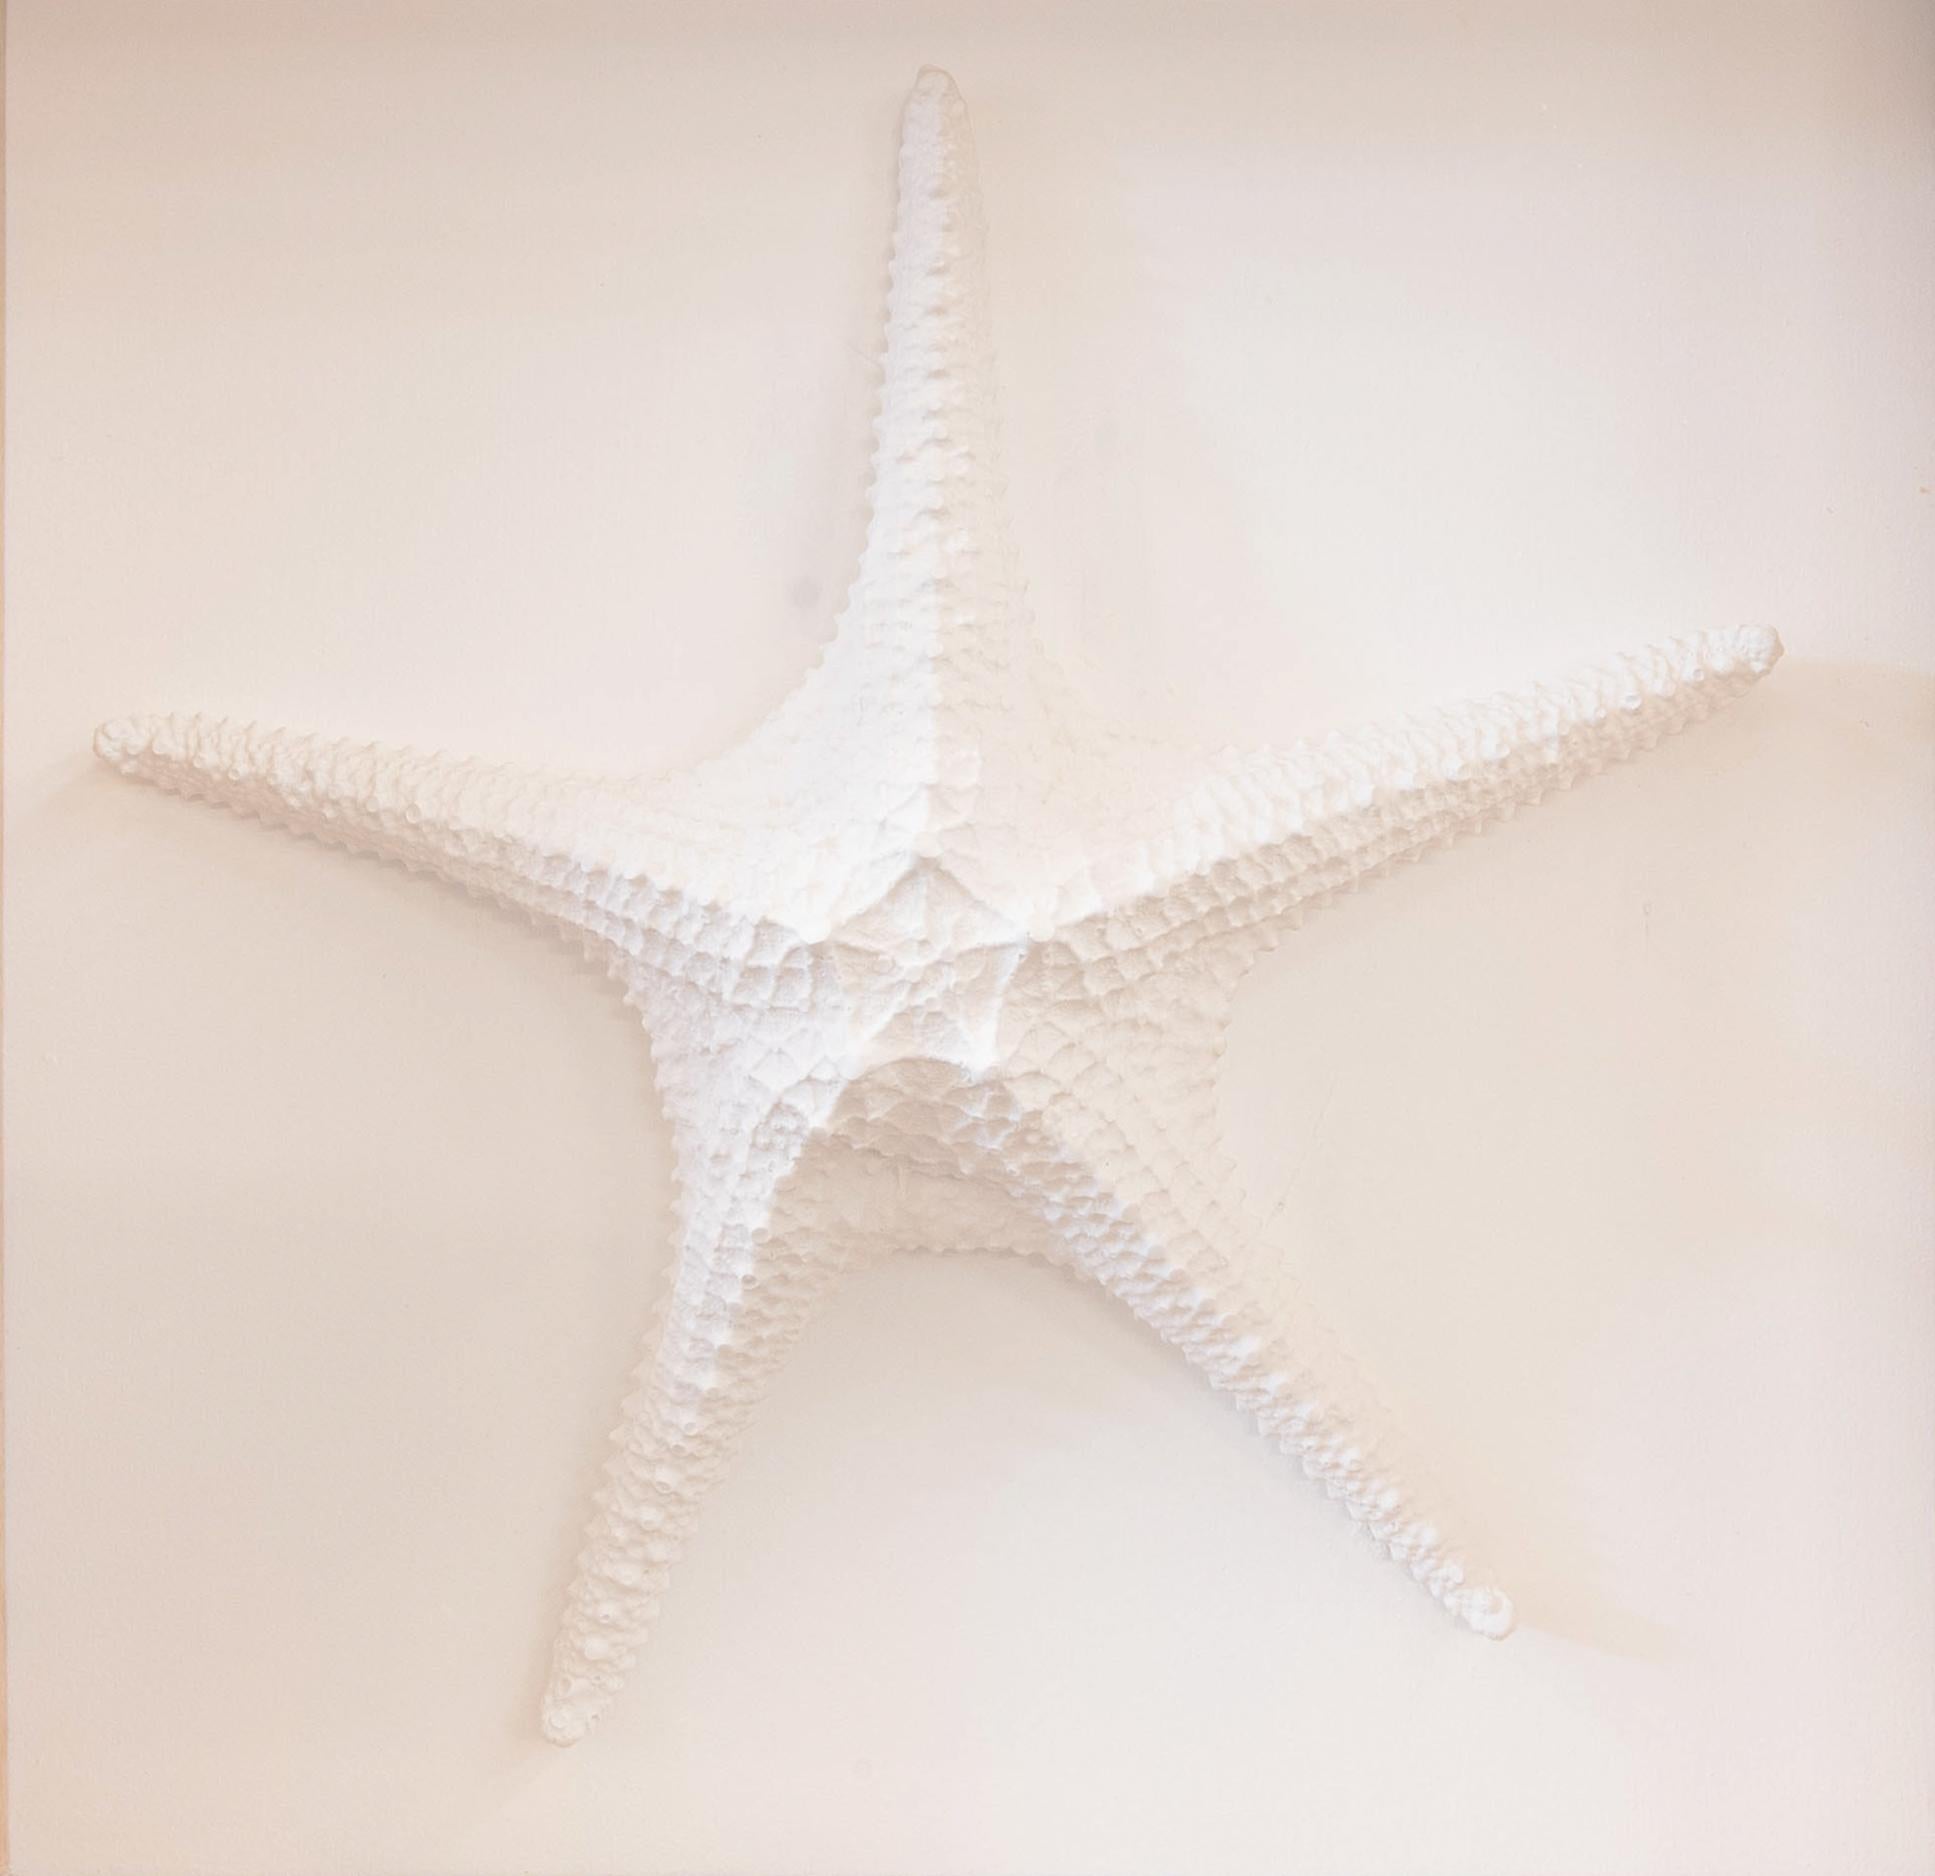 White Starfish Sculpture for Ocean Lovers. Wall Art - Painting by Arozarena De La Fuente